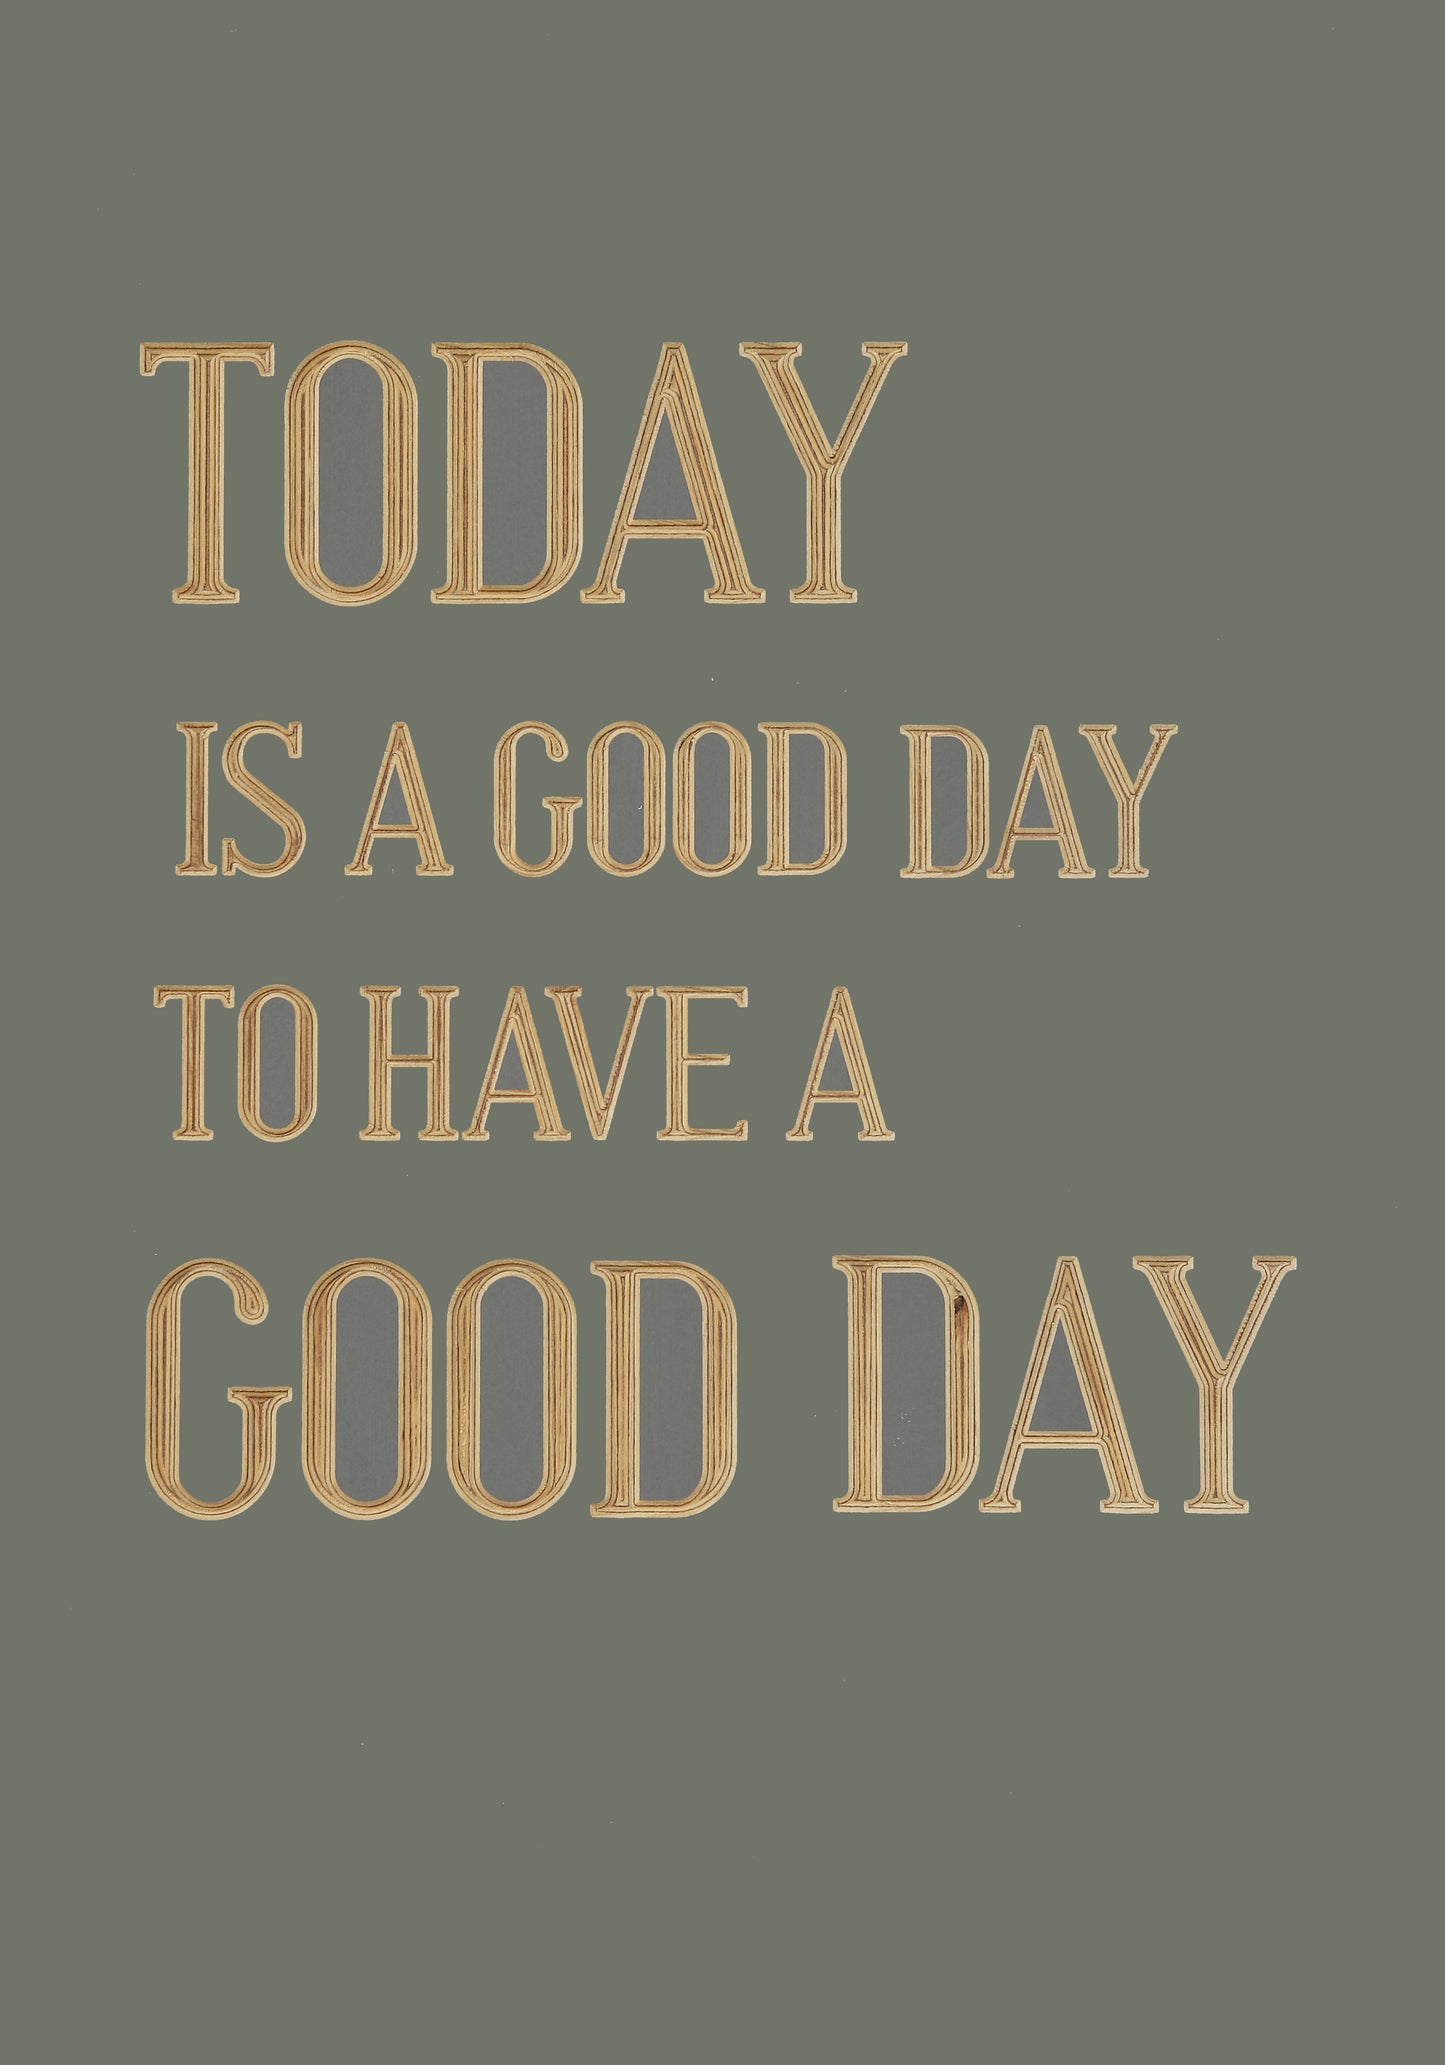 Today is a good day to have a good day